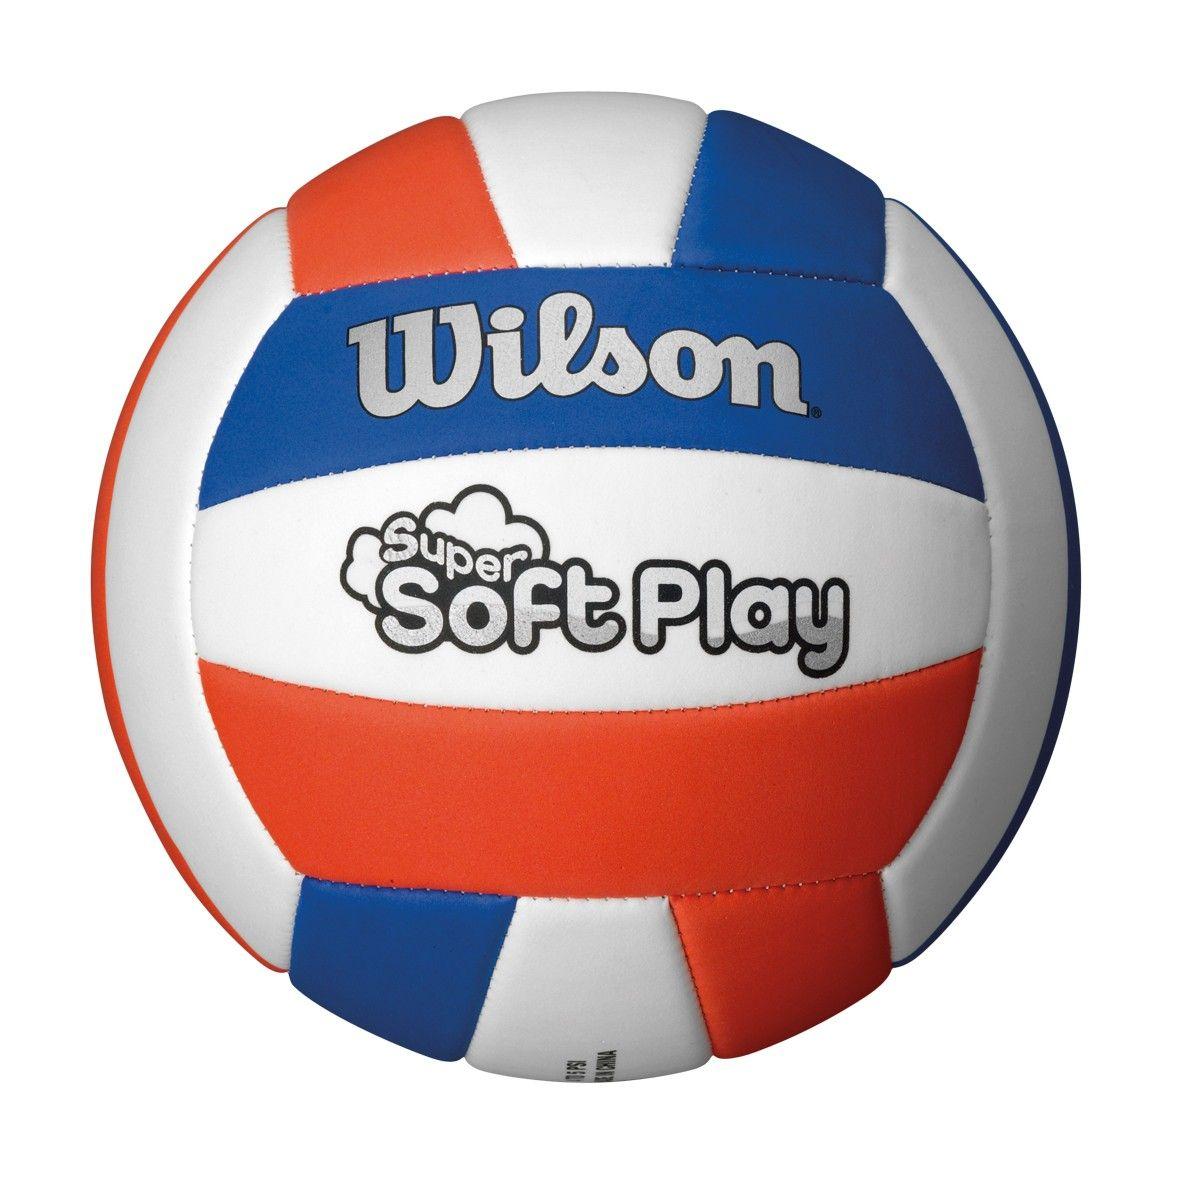 Red and Yellow Volleyball Logo - Super Soft Play Volleyball. Wilson Sporting Goods